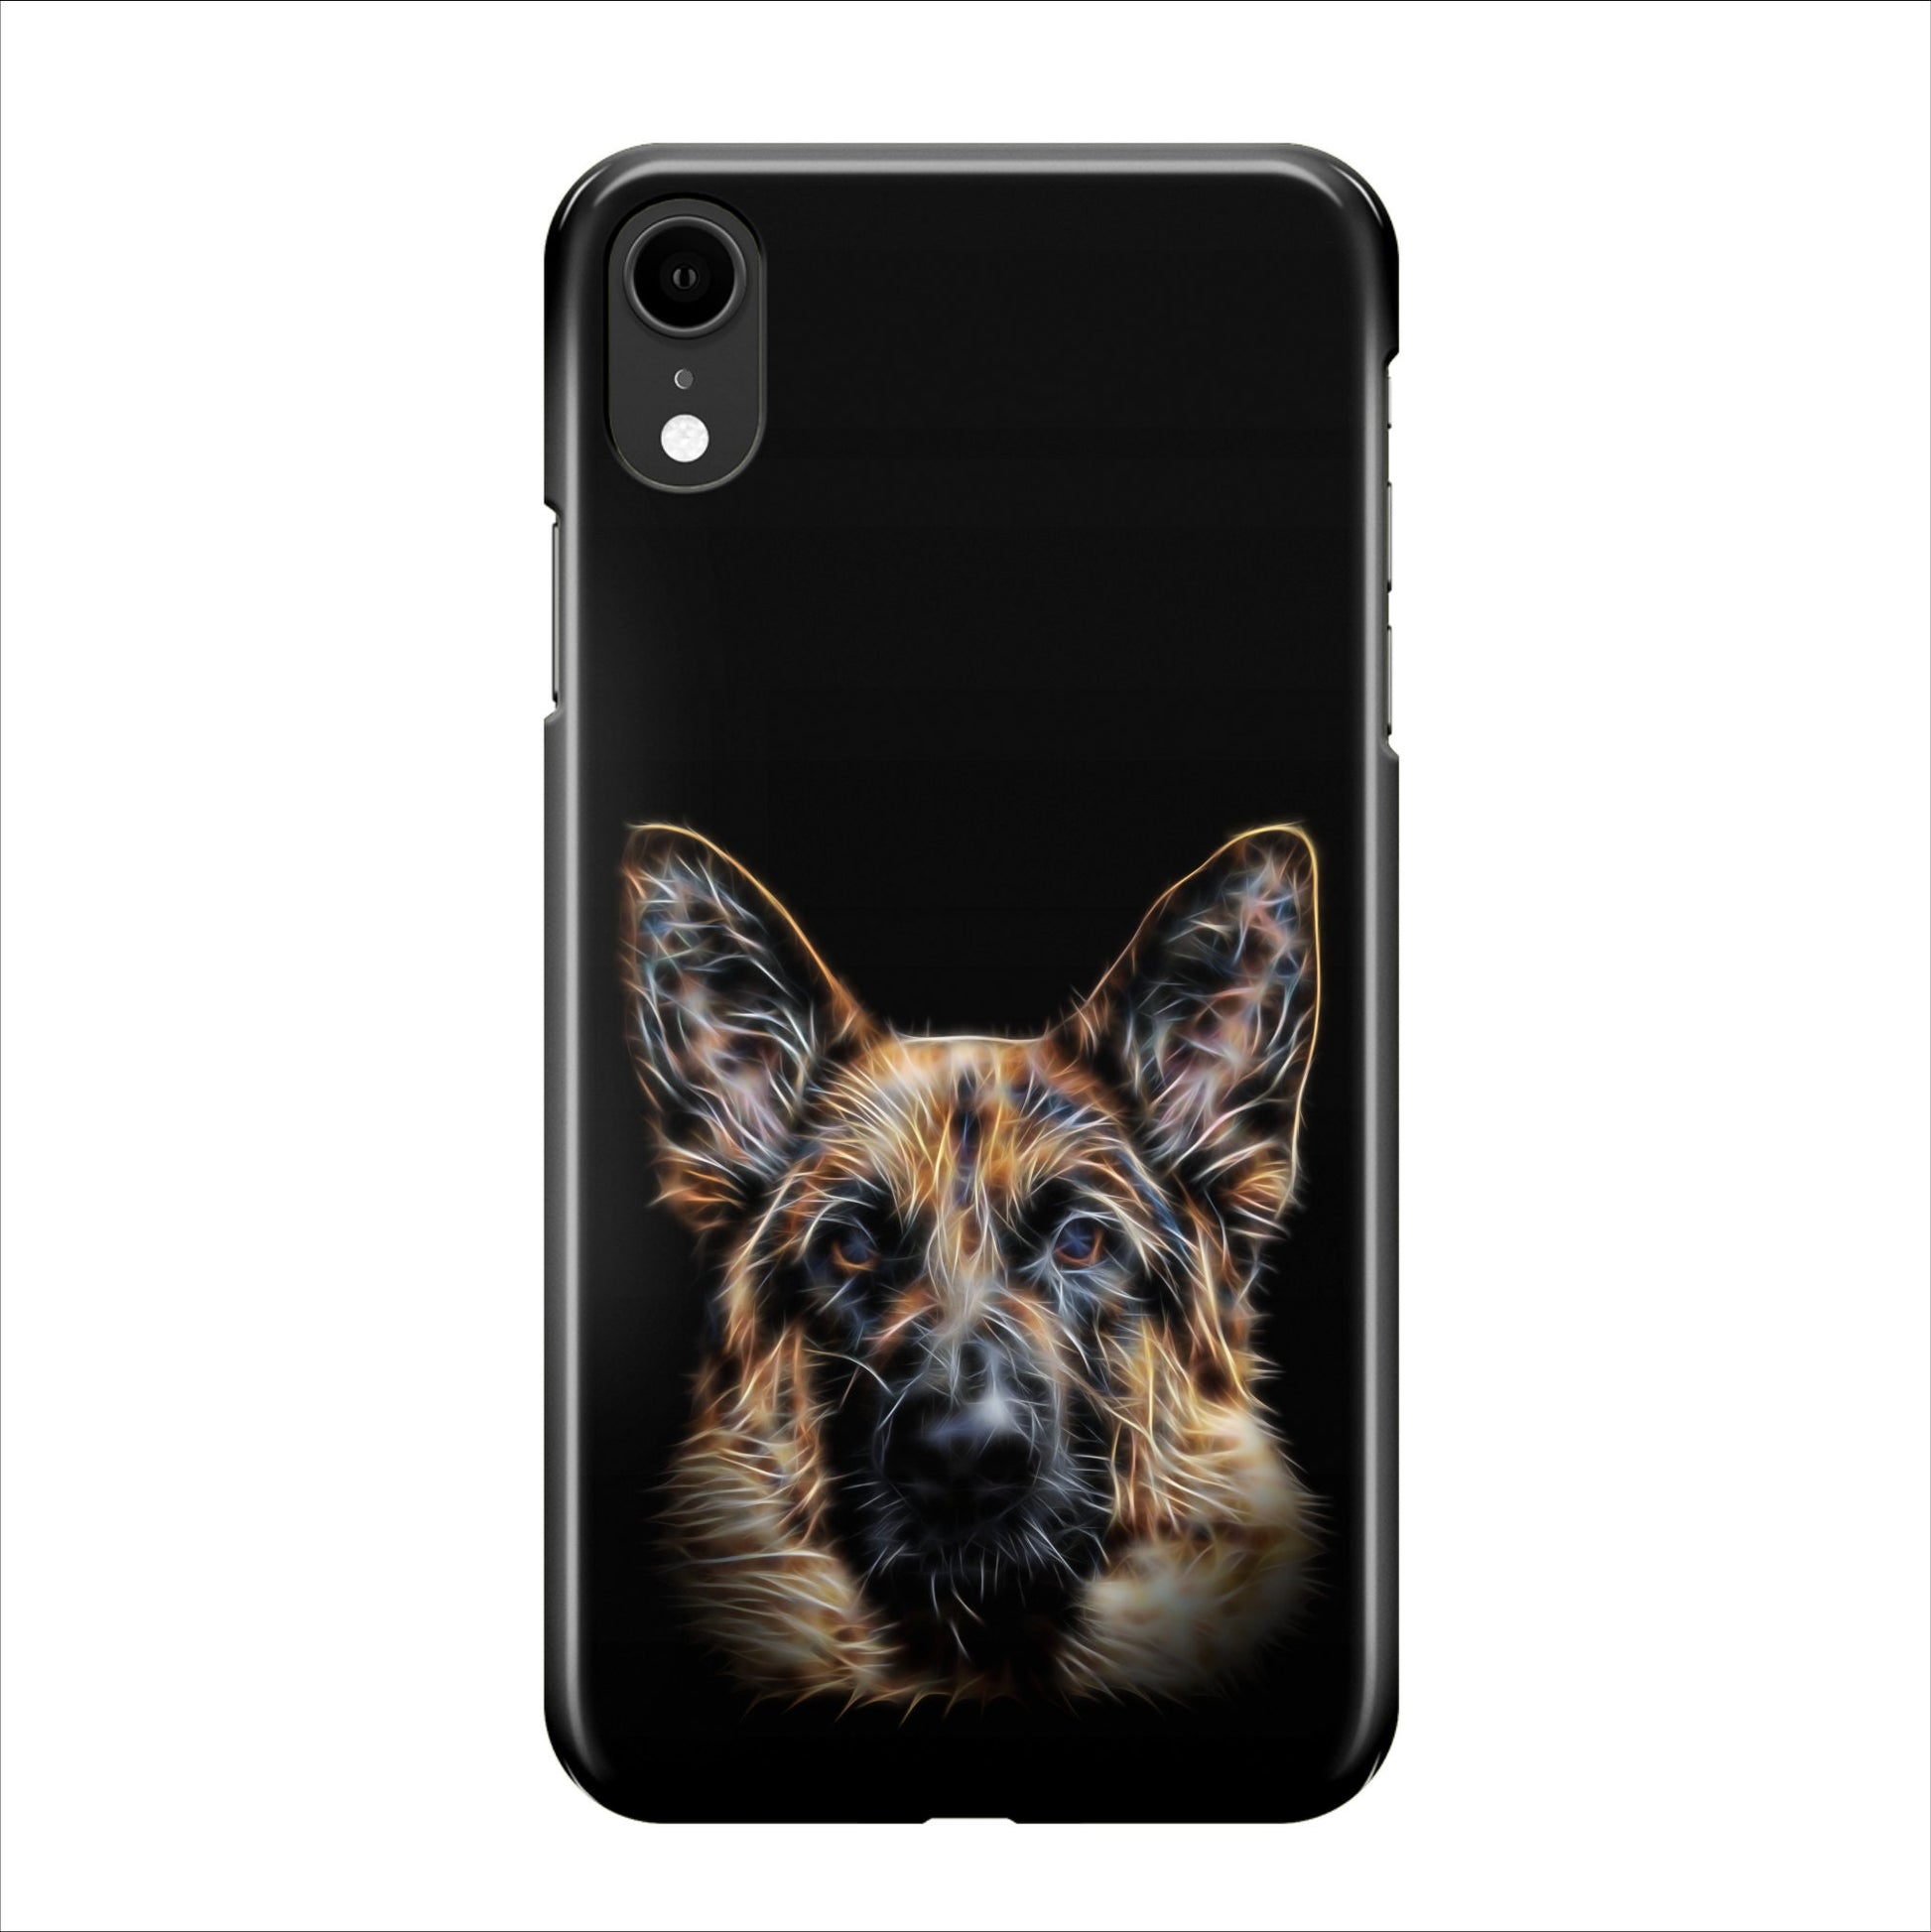 Black and Tan German Shepherd Dog Phone Case with Stunning Fractal Art Design. For Samsung or iPhone.